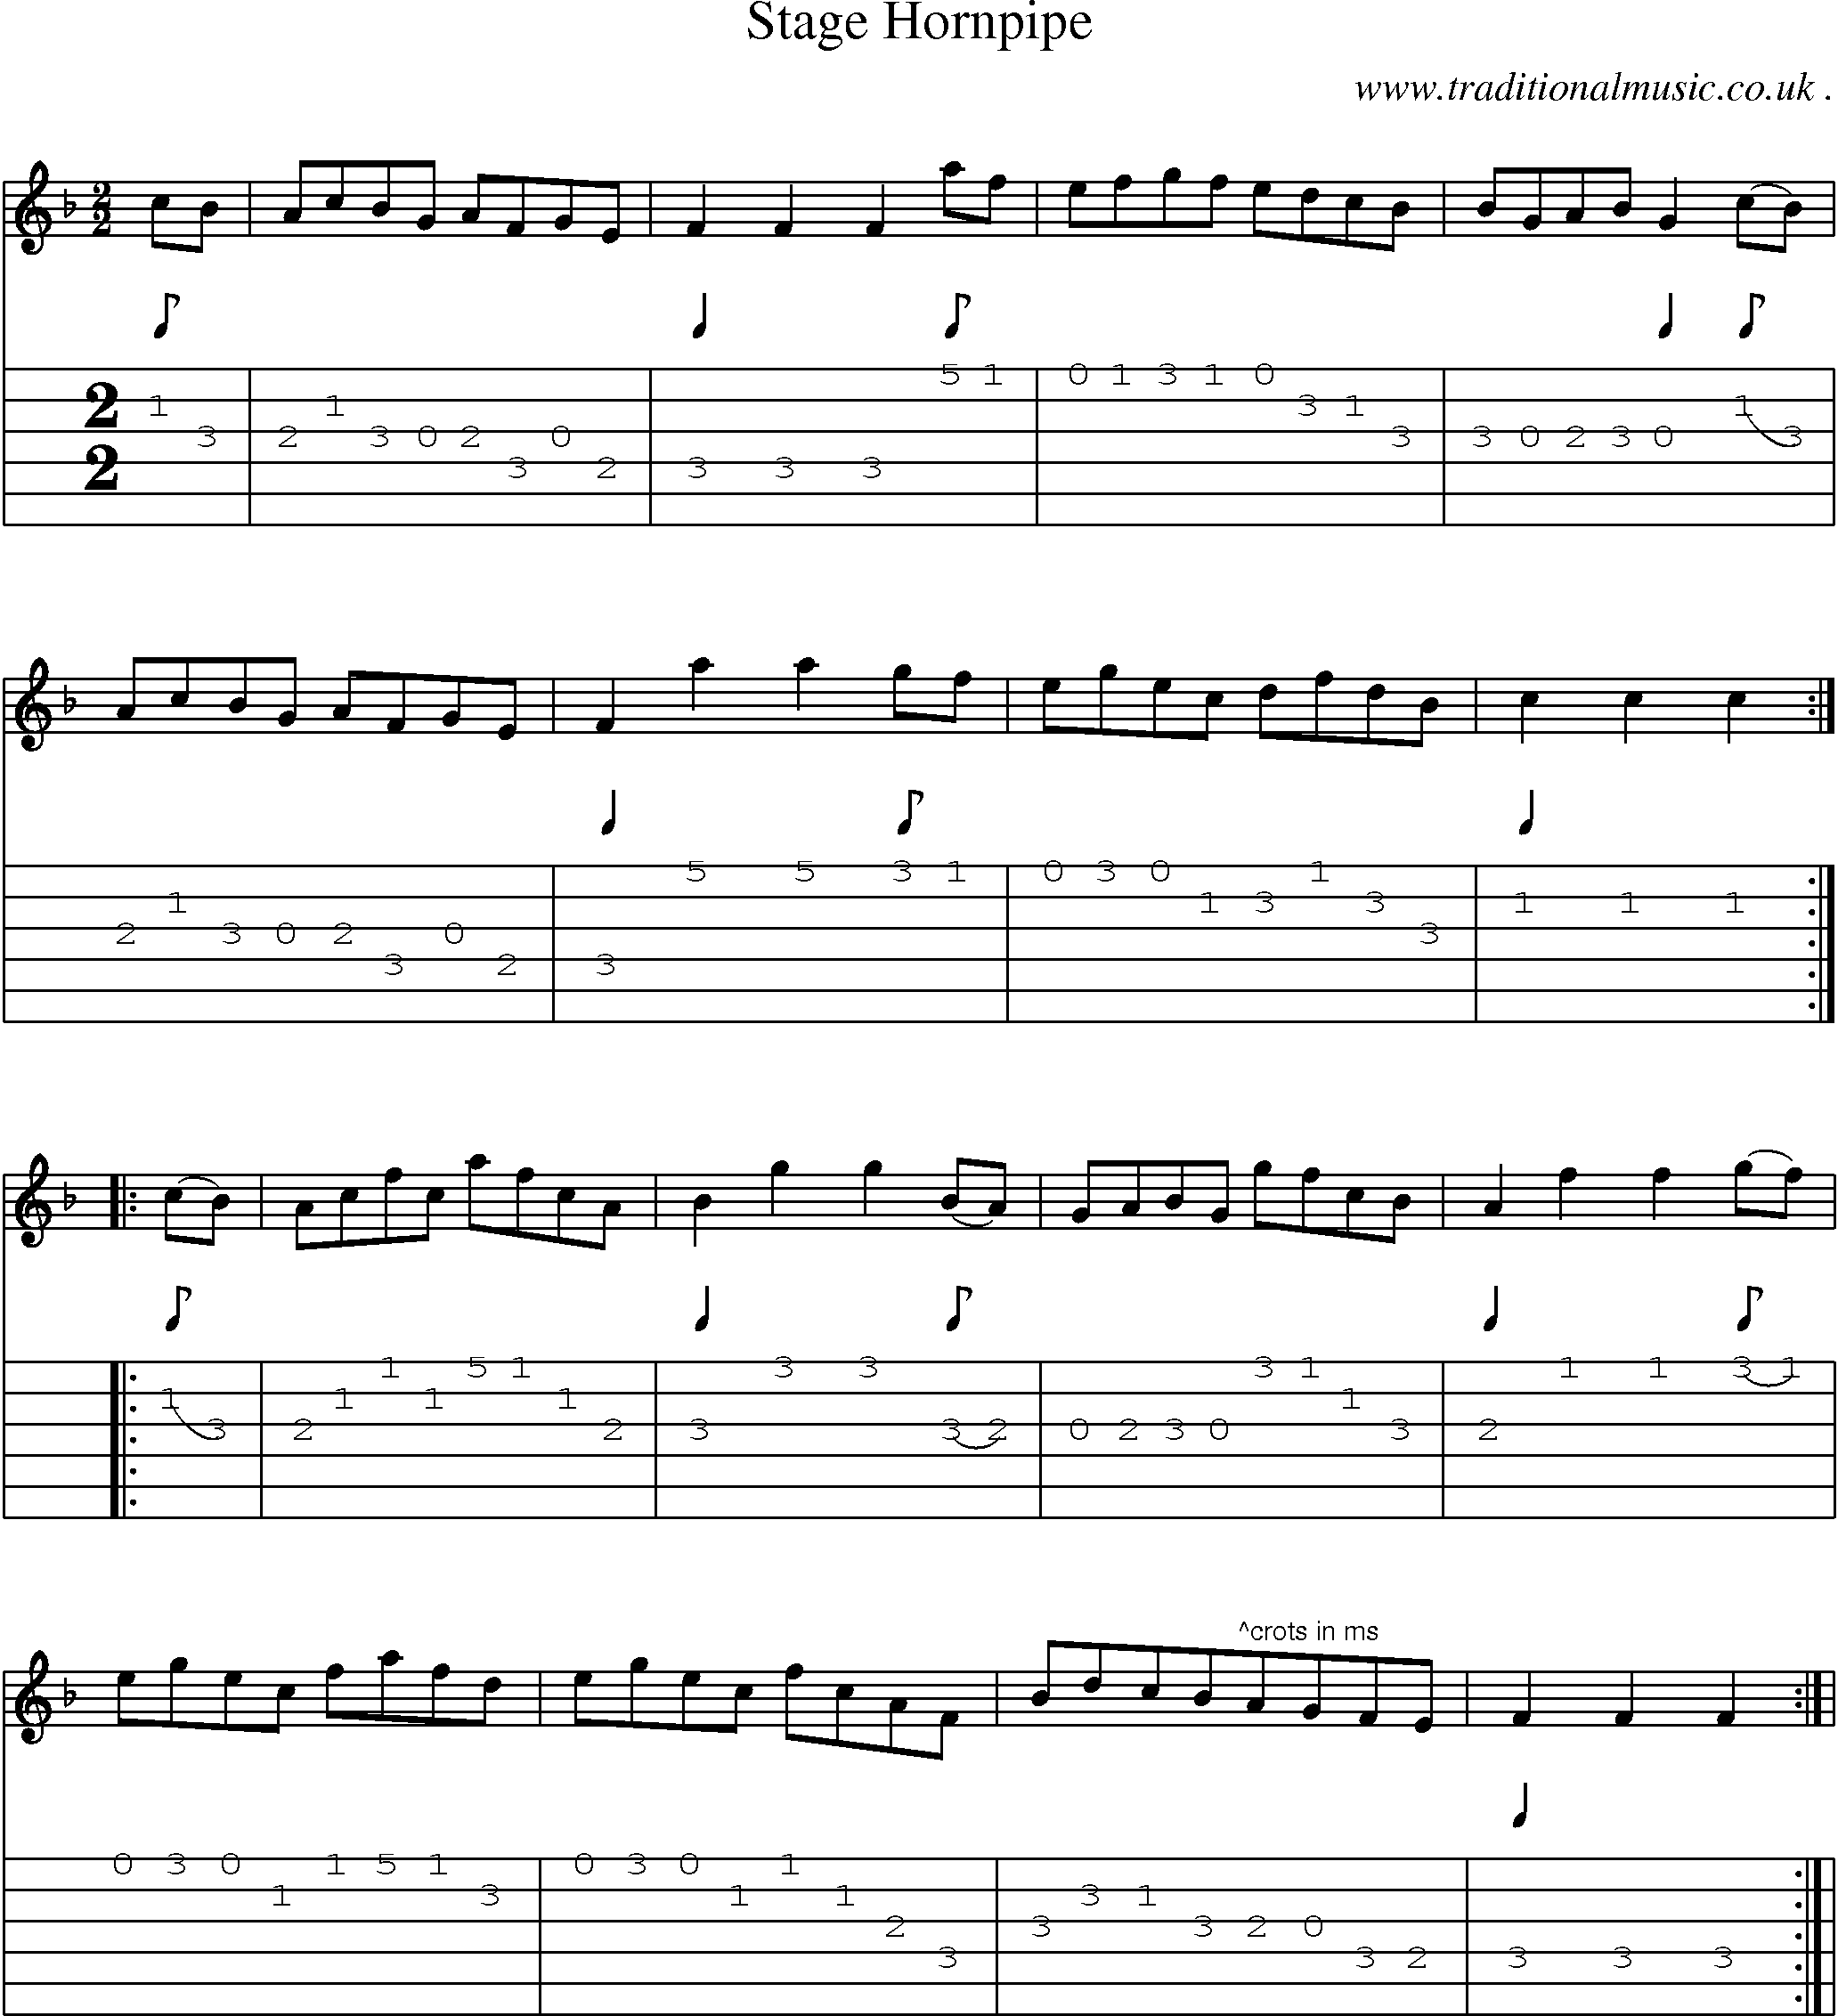 Sheet-Music and Guitar Tabs for Stage Hornpipe